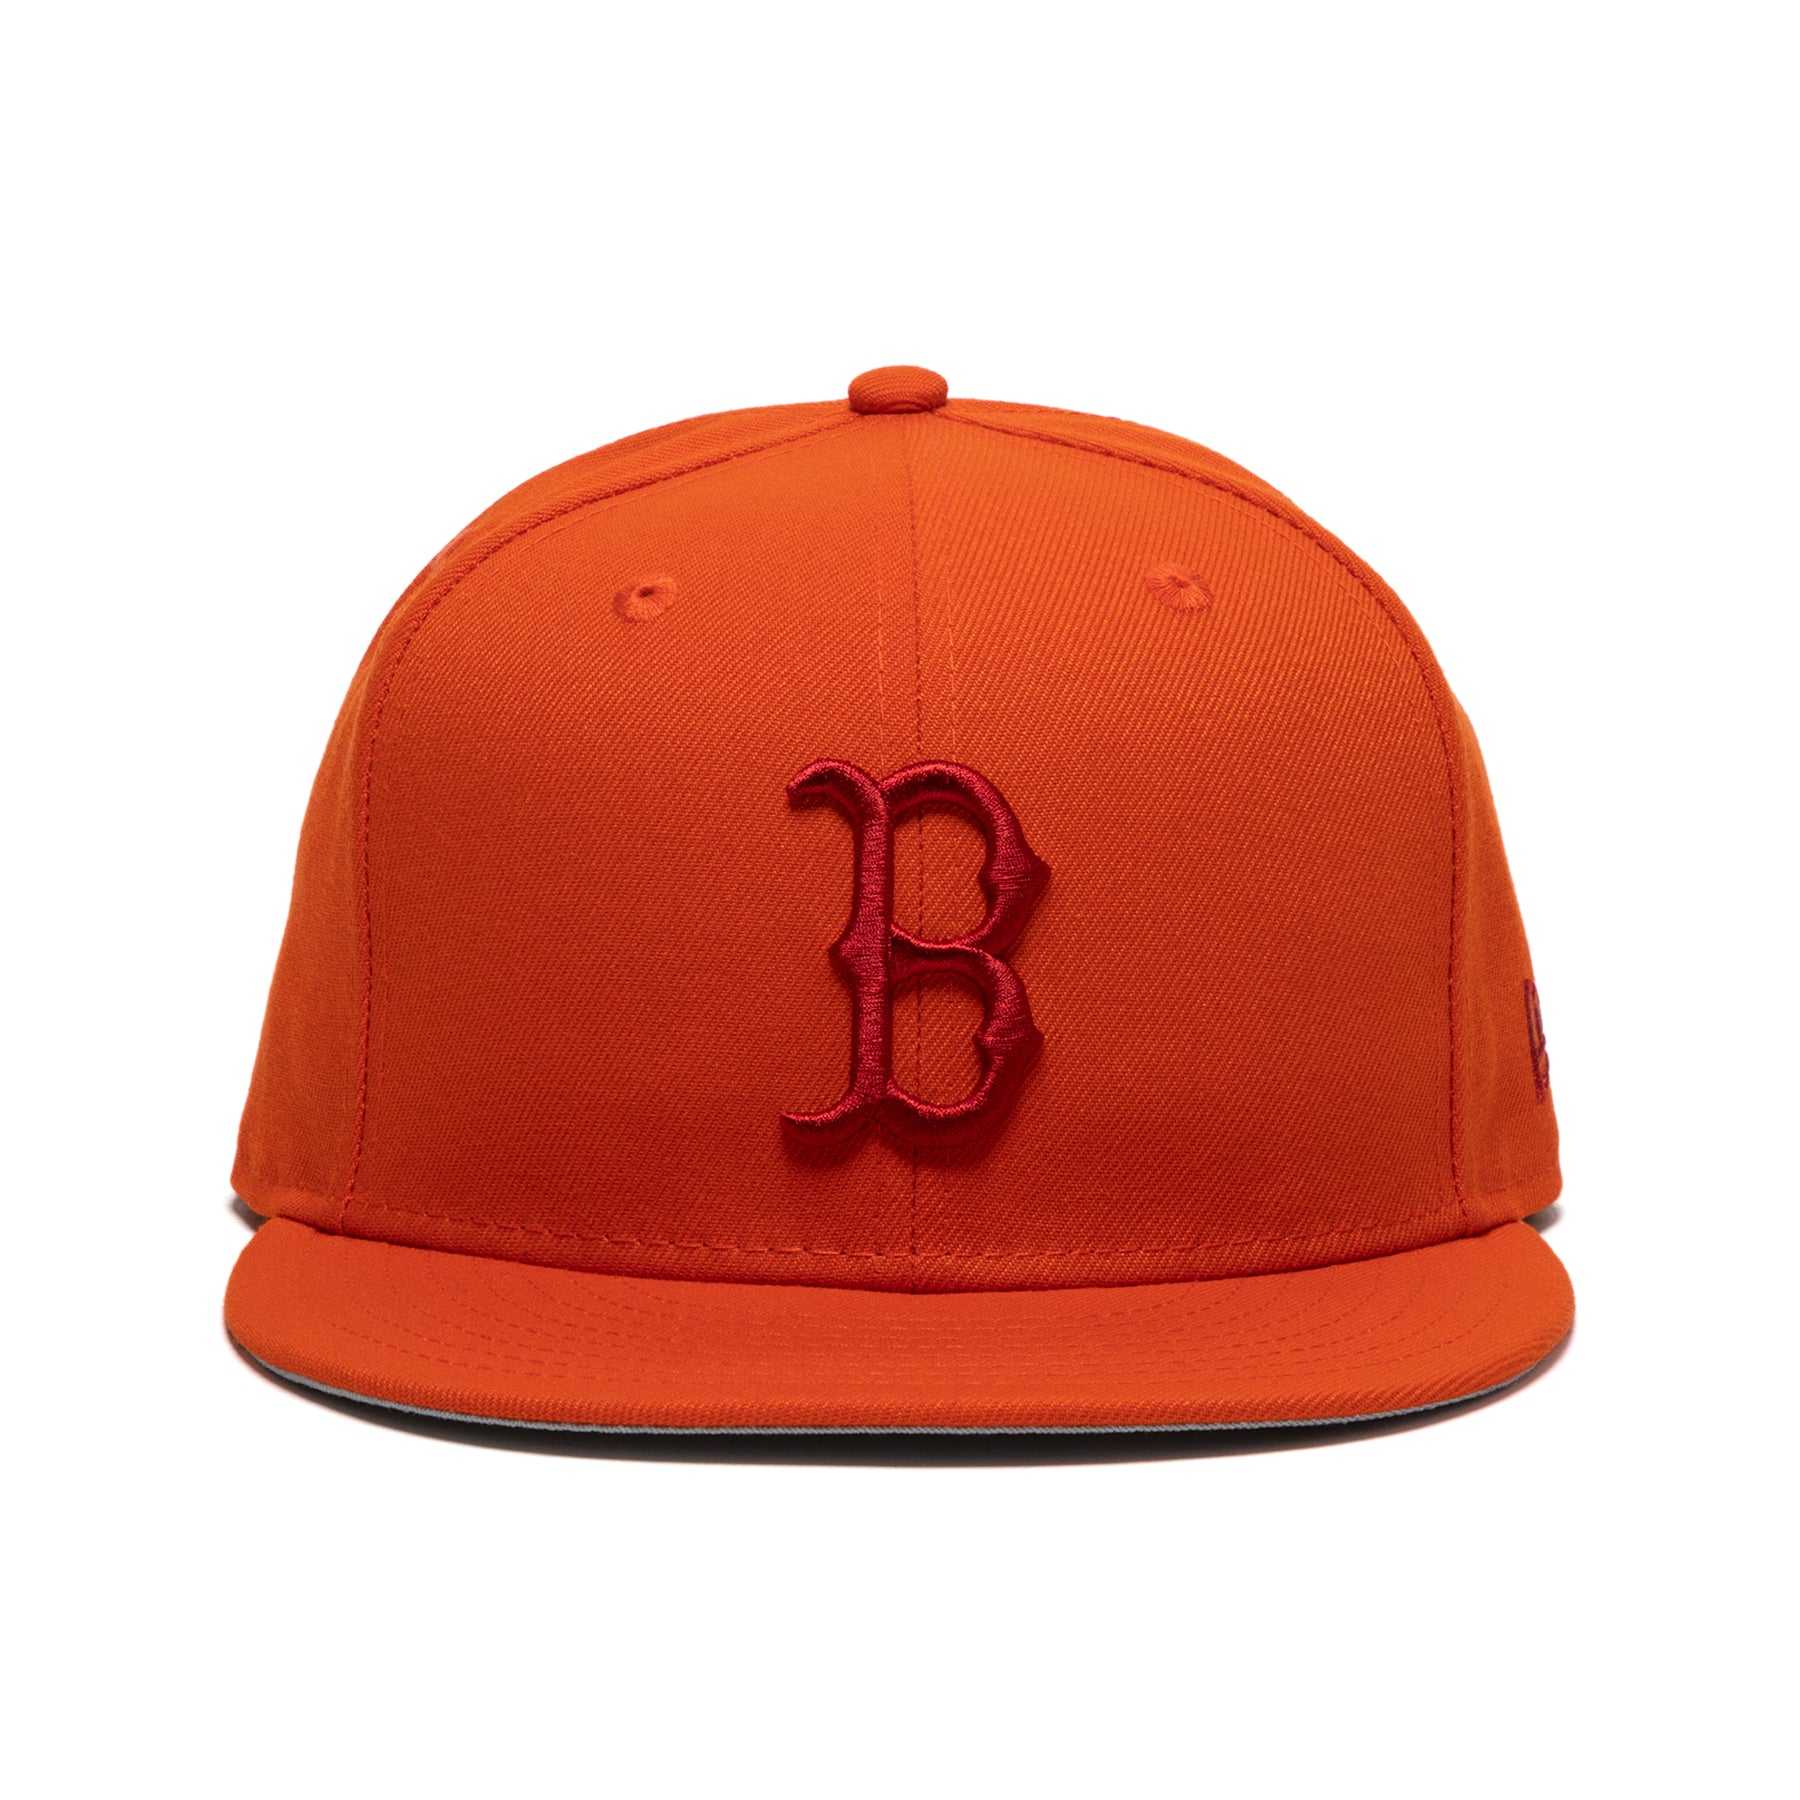 Concepts x New Era 59FIFTY Boston Red Sox Fitted Hat (Orange/Grey) 7 5/8